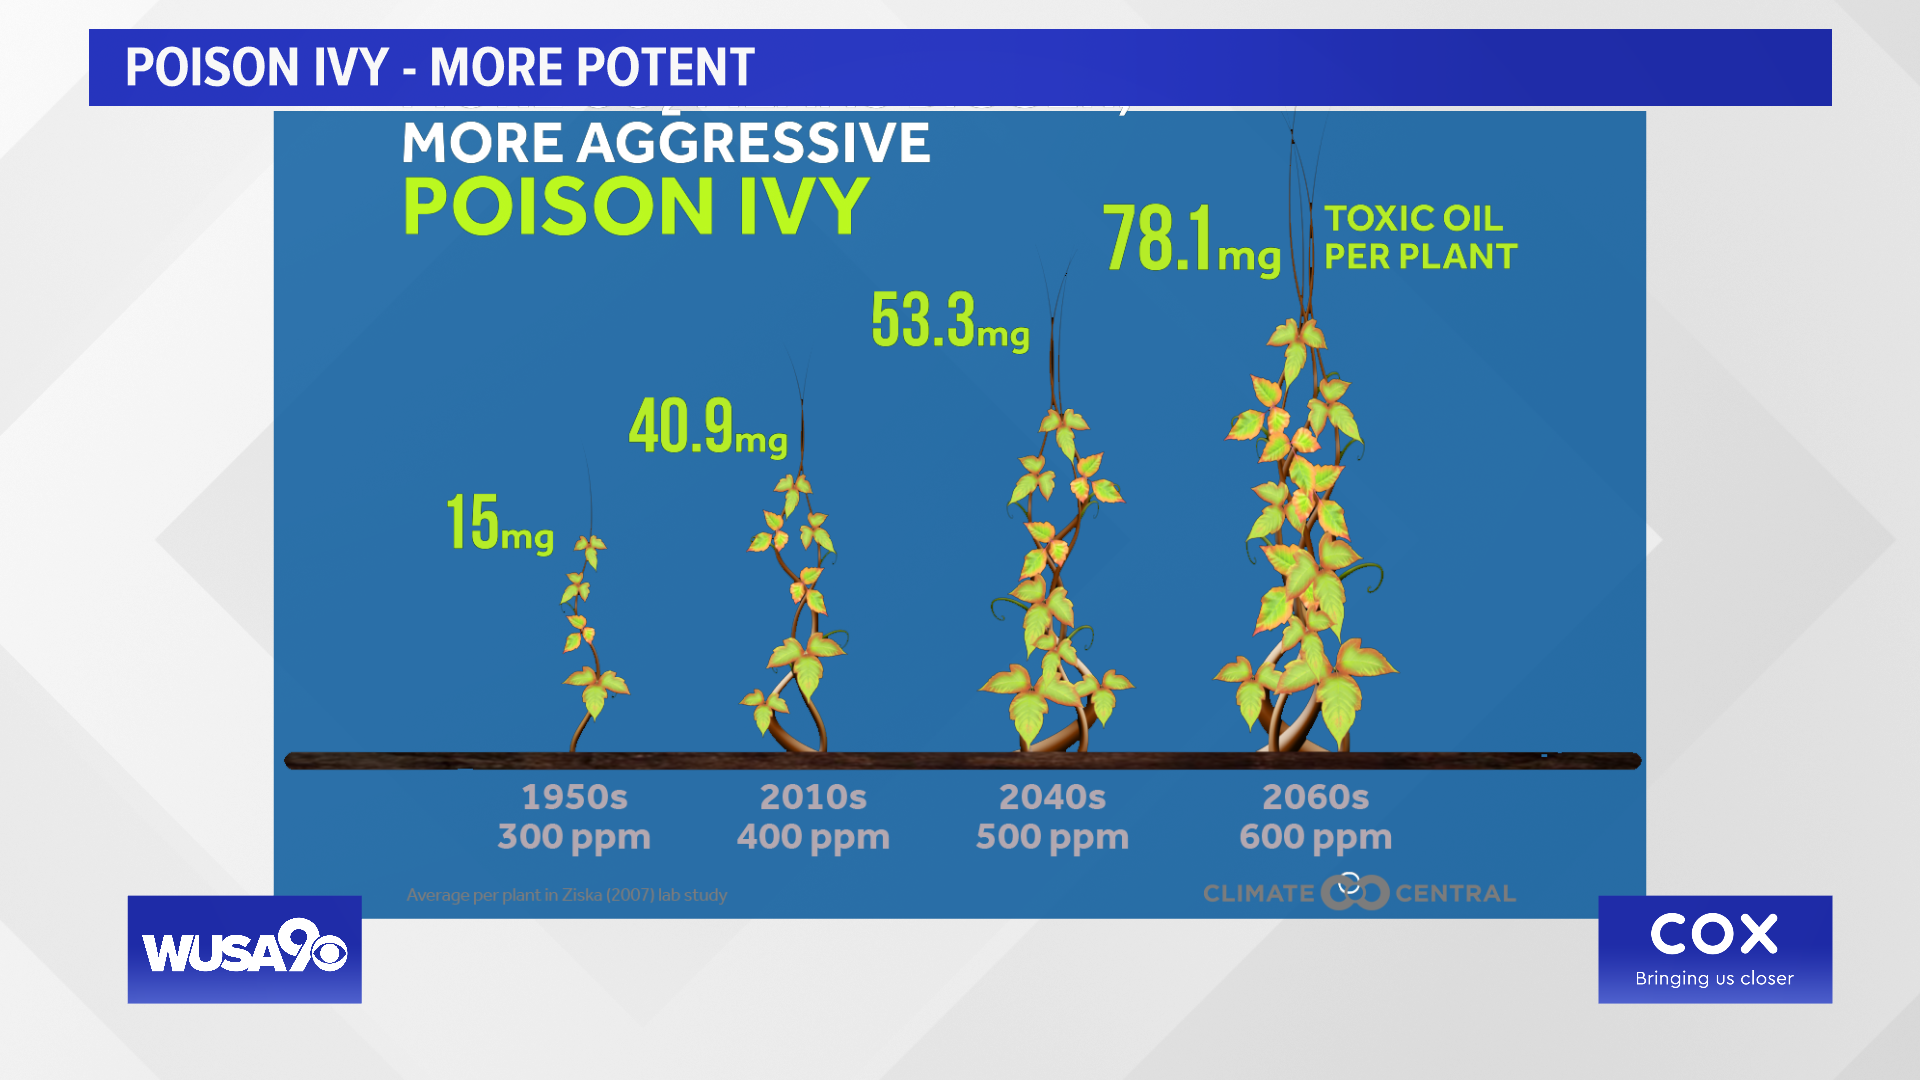 Higher carbon dioxide levels are making poison ivy bigger and stronger.